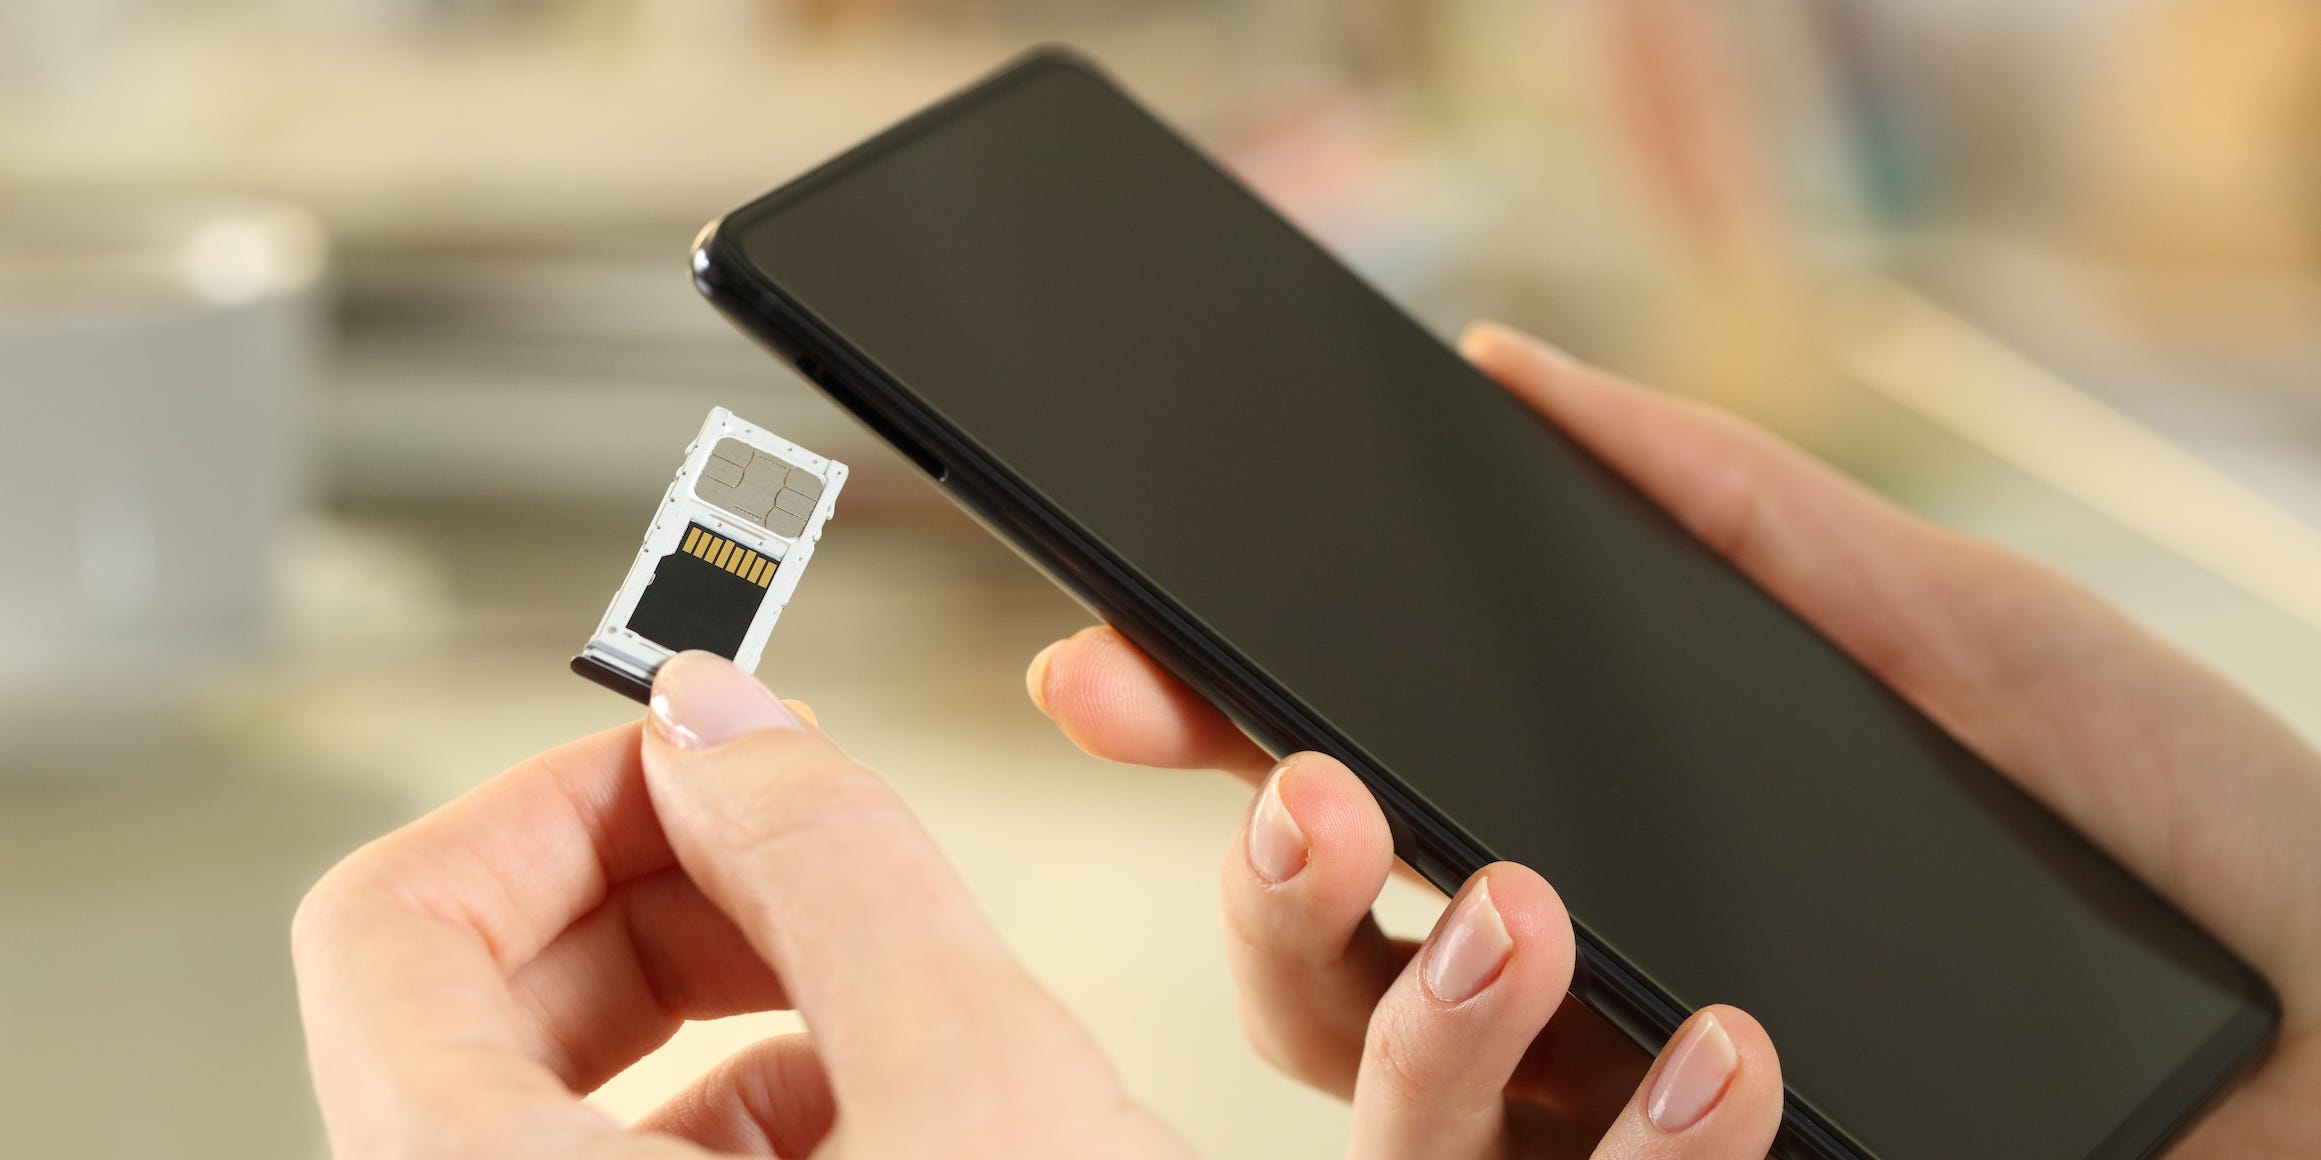 SIM card being inserted into Android phone